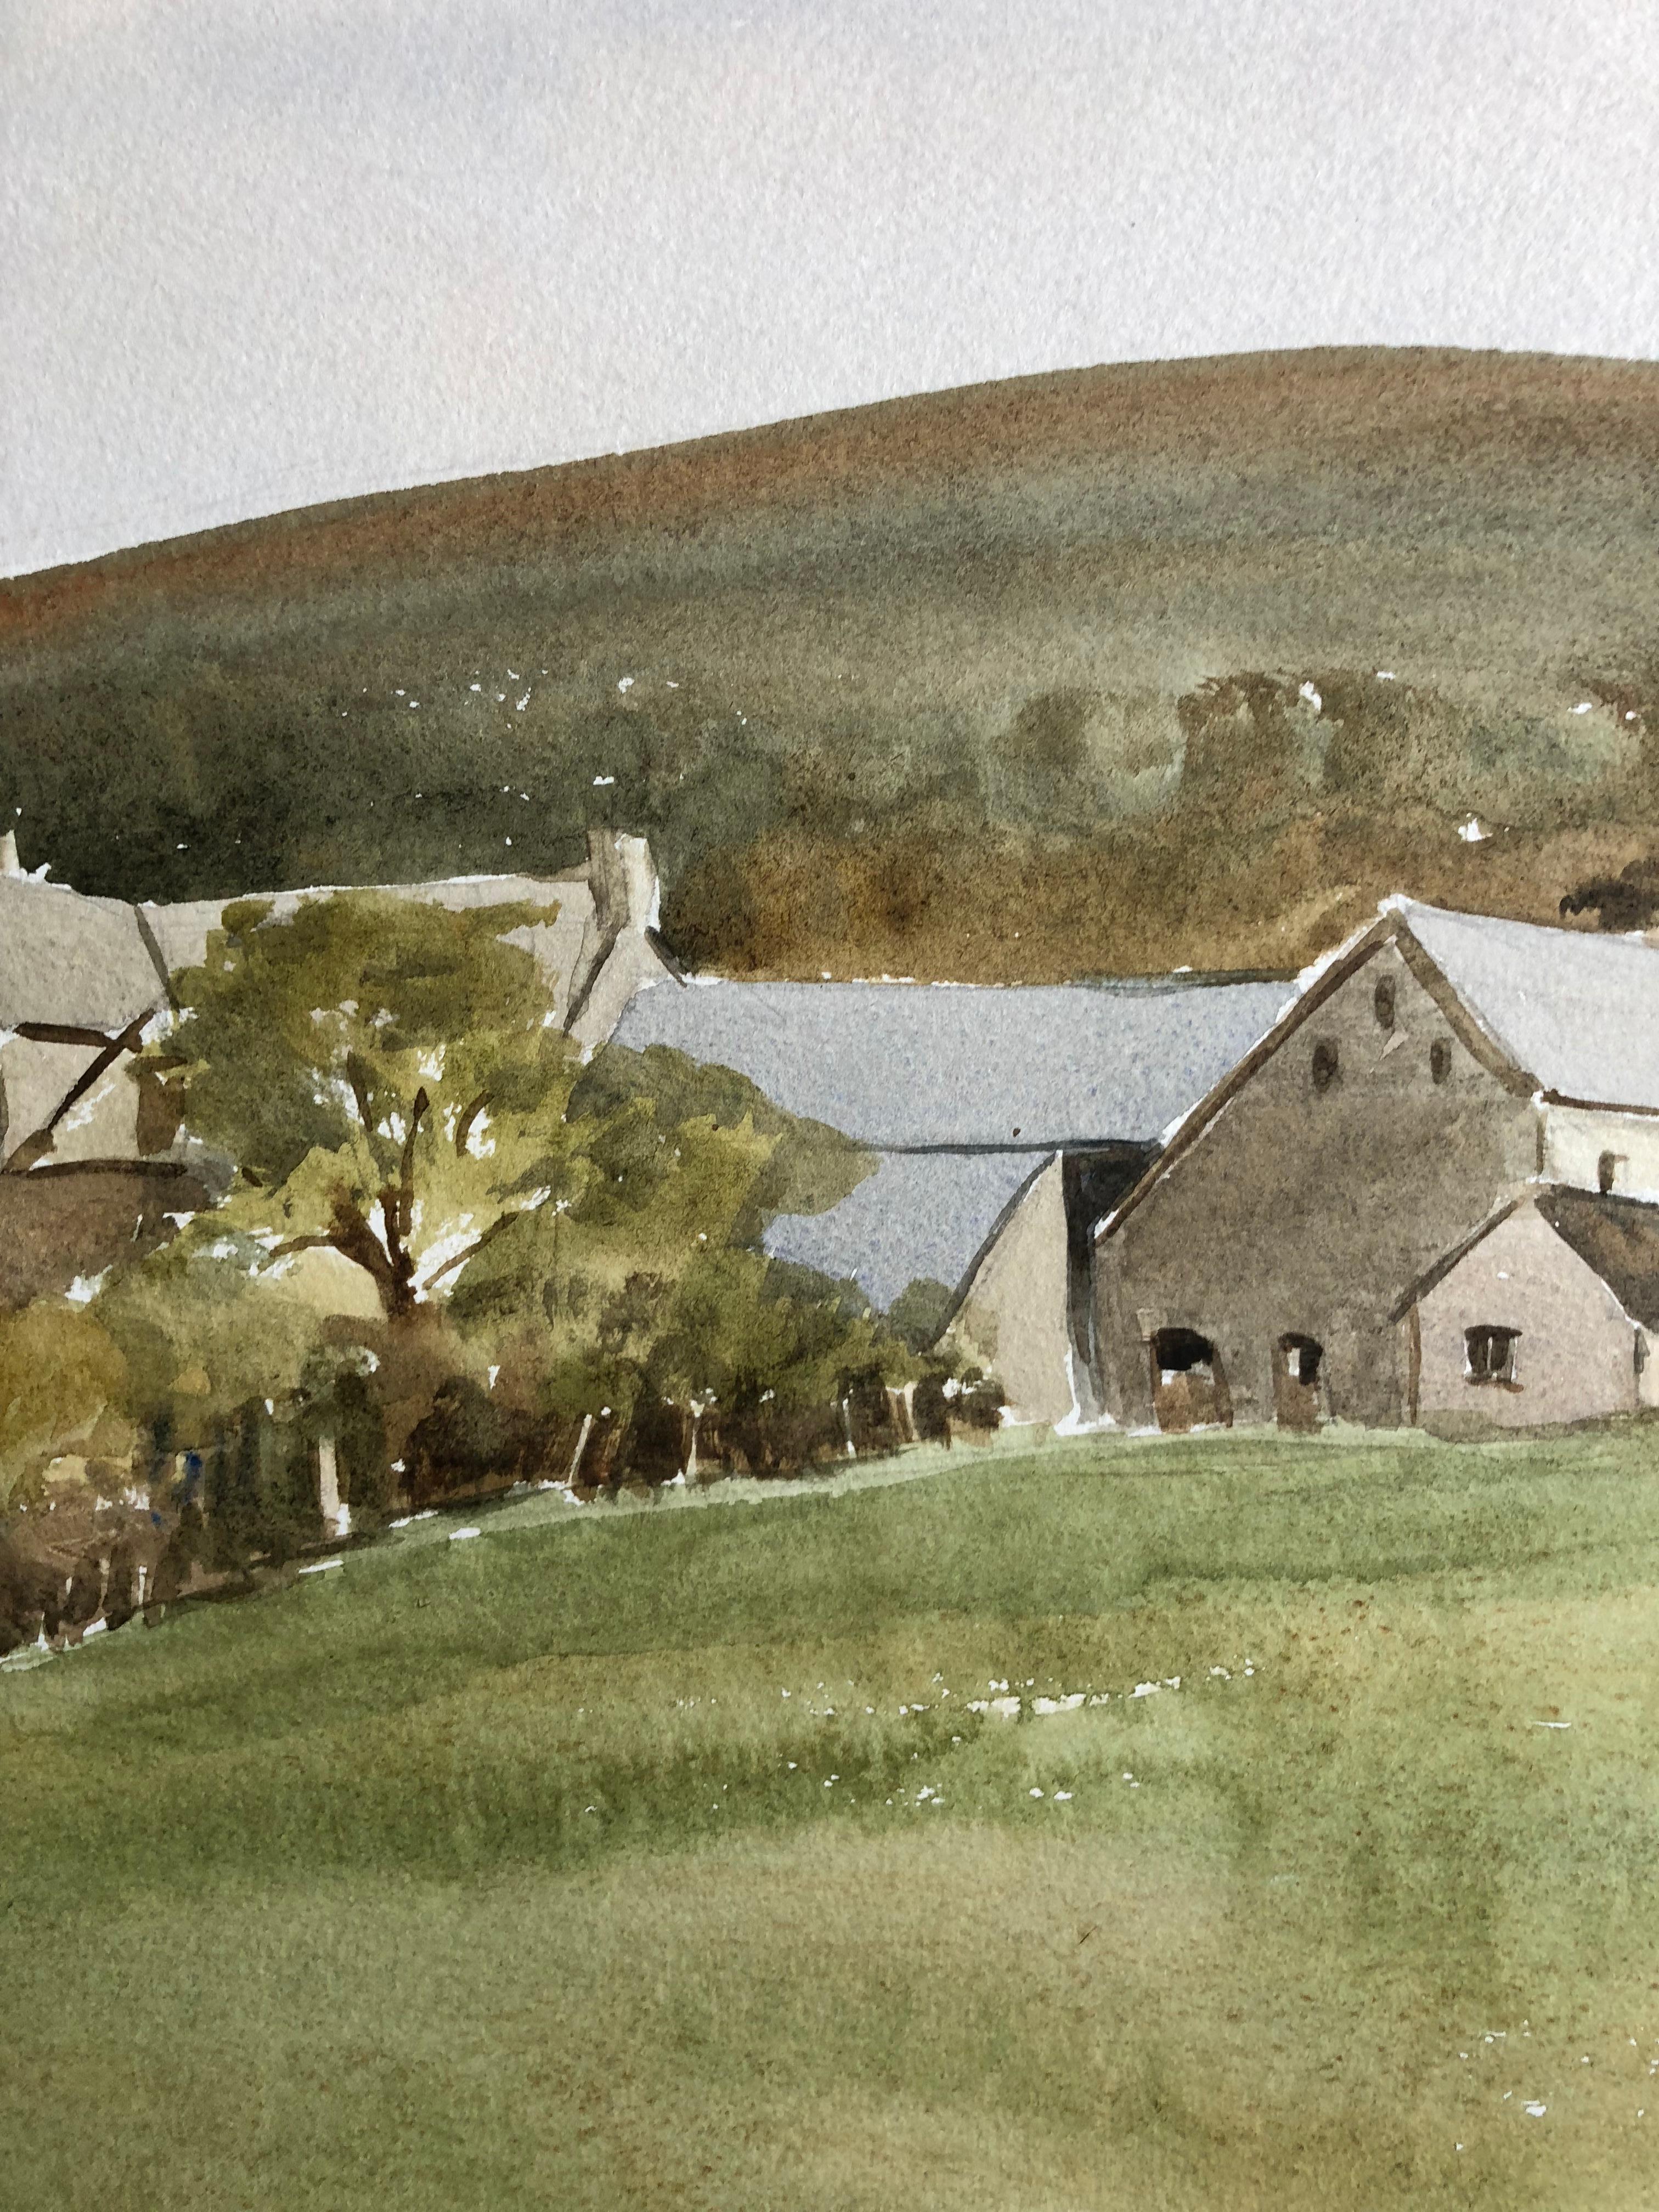 Old Farm Buildings at Carrog
by Ronald Birch, British circa 1970's
watercolour on art paper, unframed
overall paper measures: 15 x 22 inches
titled and dated 'April 1990'

*FREE SHIPPING ON THIS PAINTING*: AMERICAN, EUROPE & UNITED